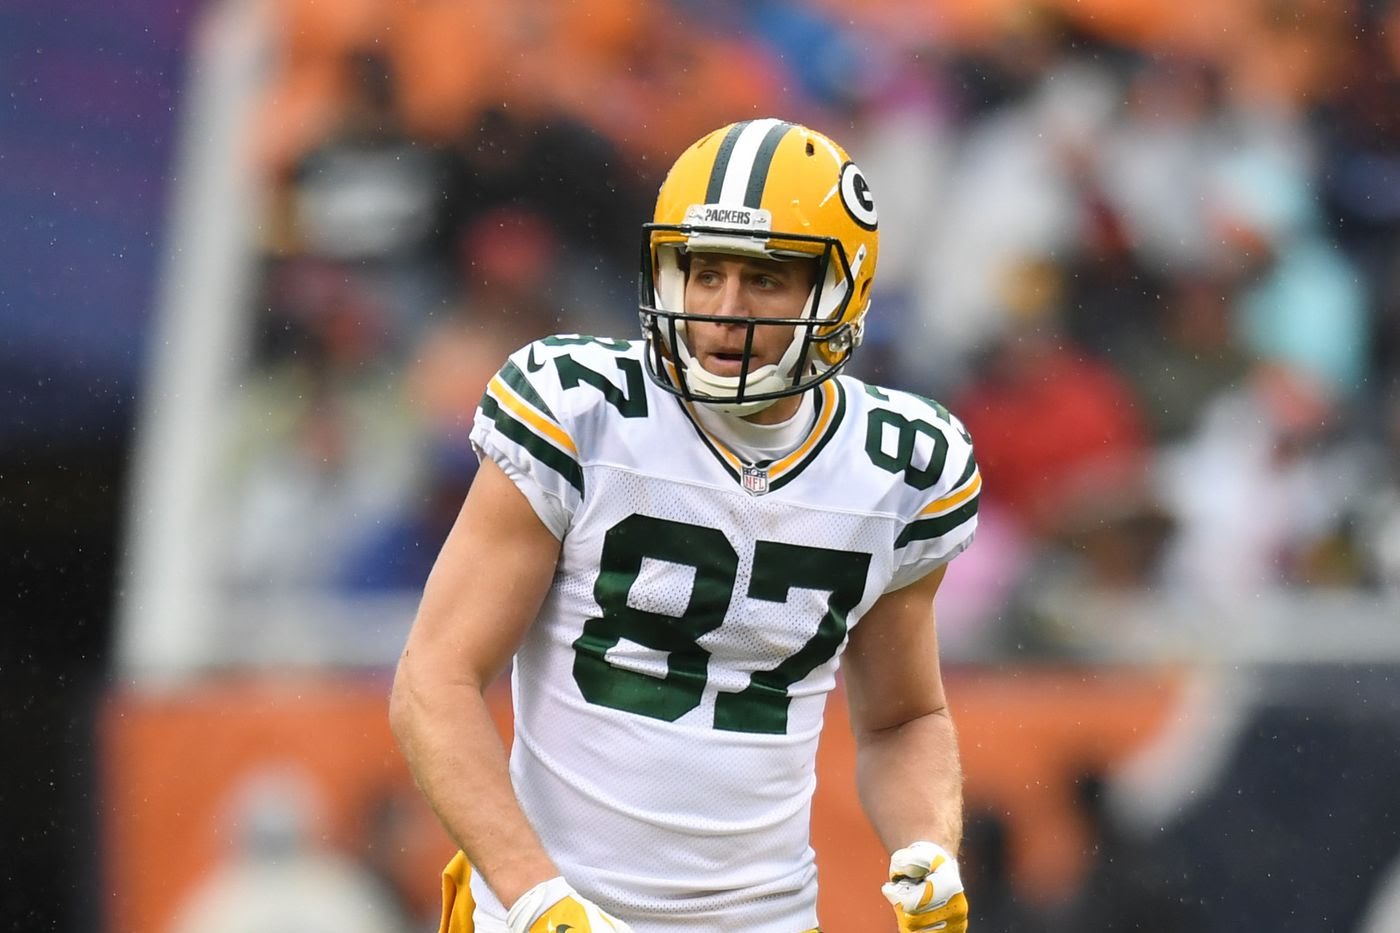 Jordy Nelson shows love for Green Bay, to retire as a packer using 1-day contract